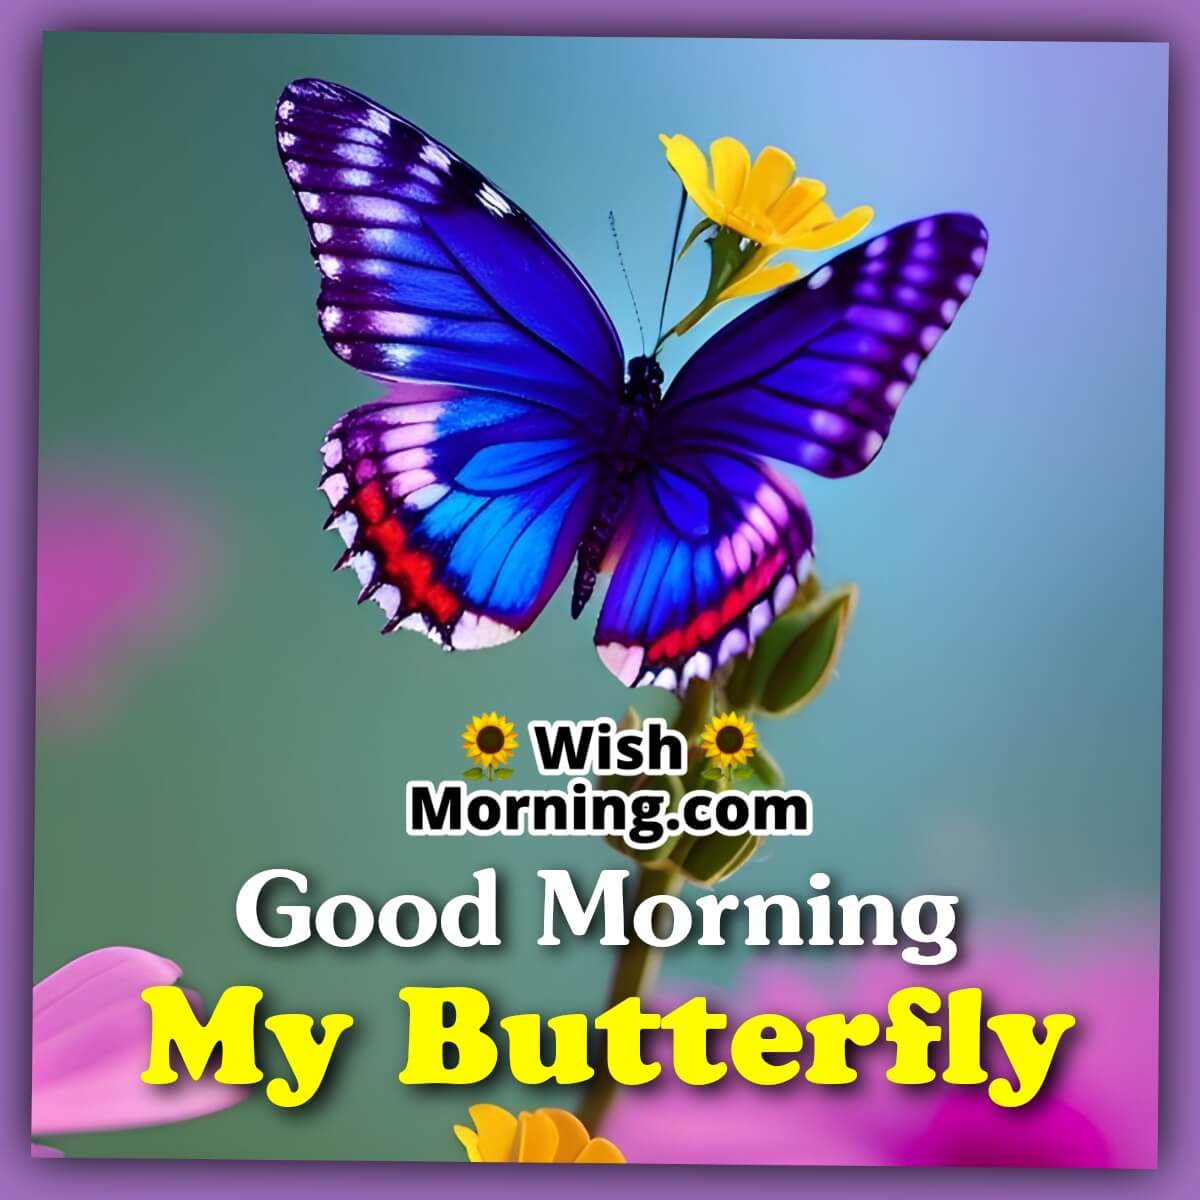 Good Morning My Butterfly